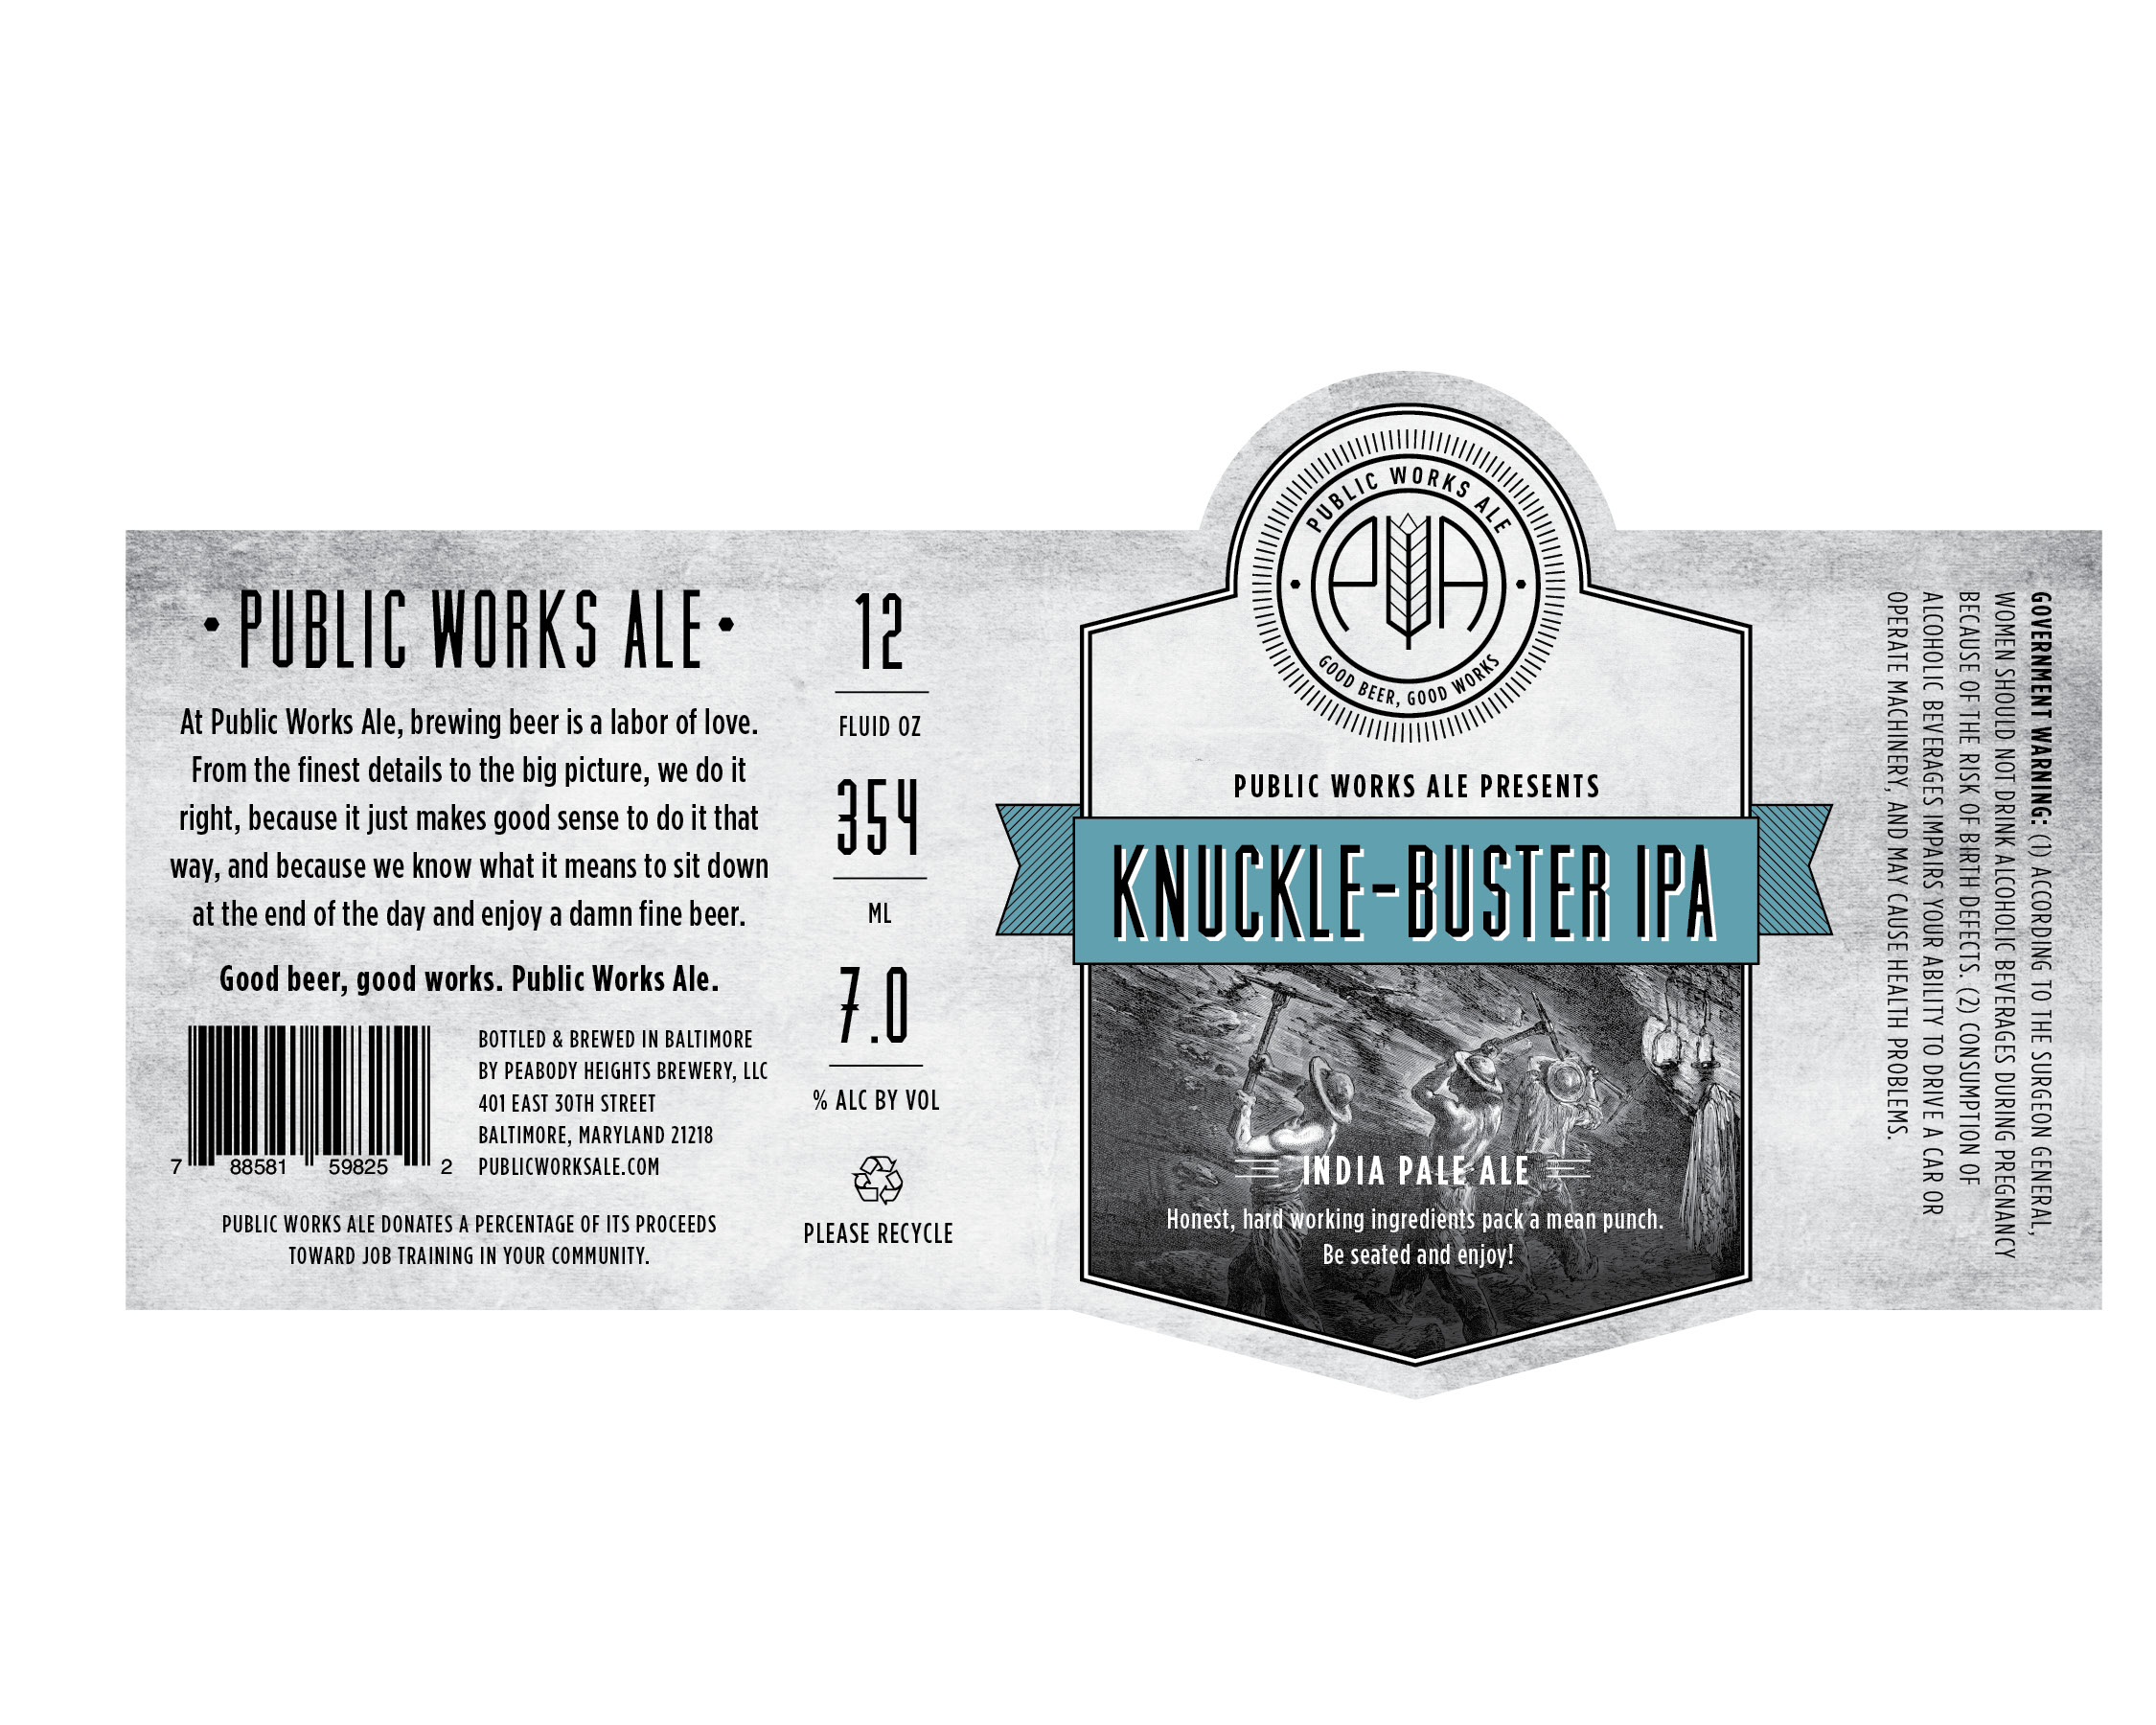 Peabody Heights Knuckle-Buster IPA